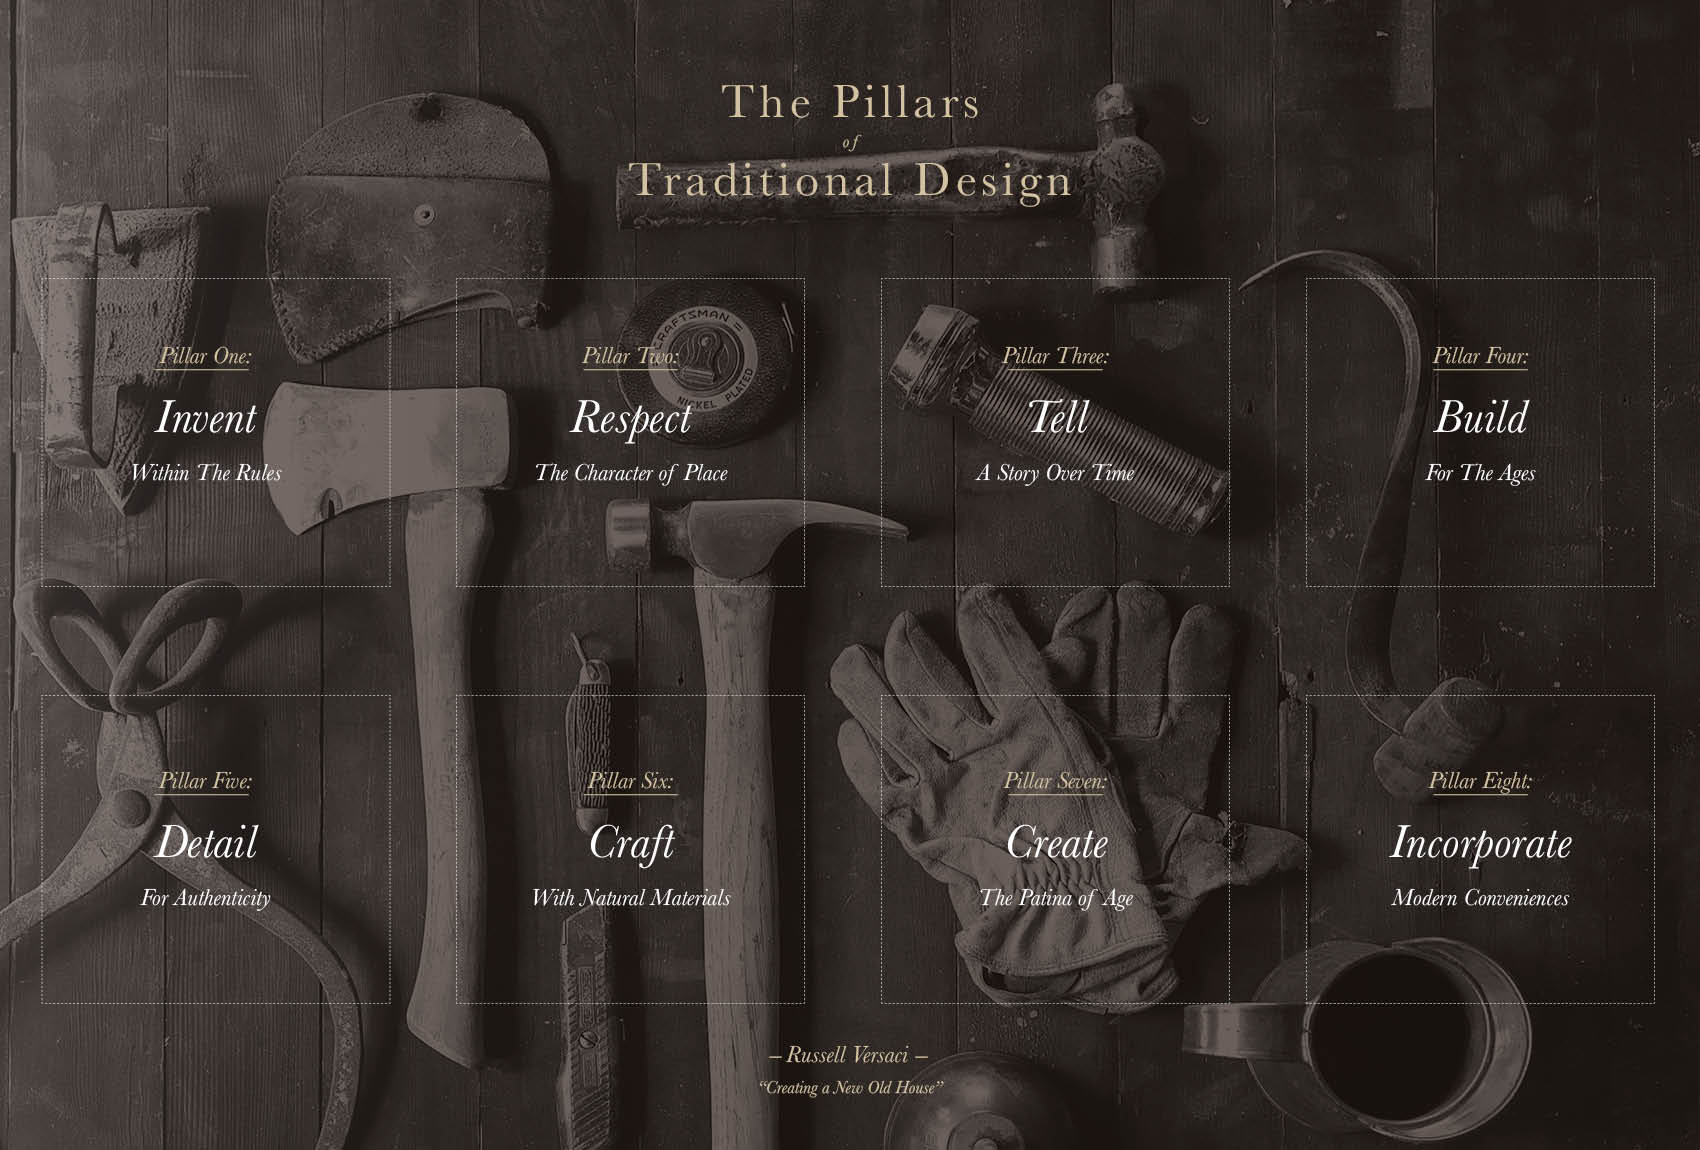   The Pillars of Design Editorial Layout    commissioned by  Young Athenians  for  Artisan Built  2015 